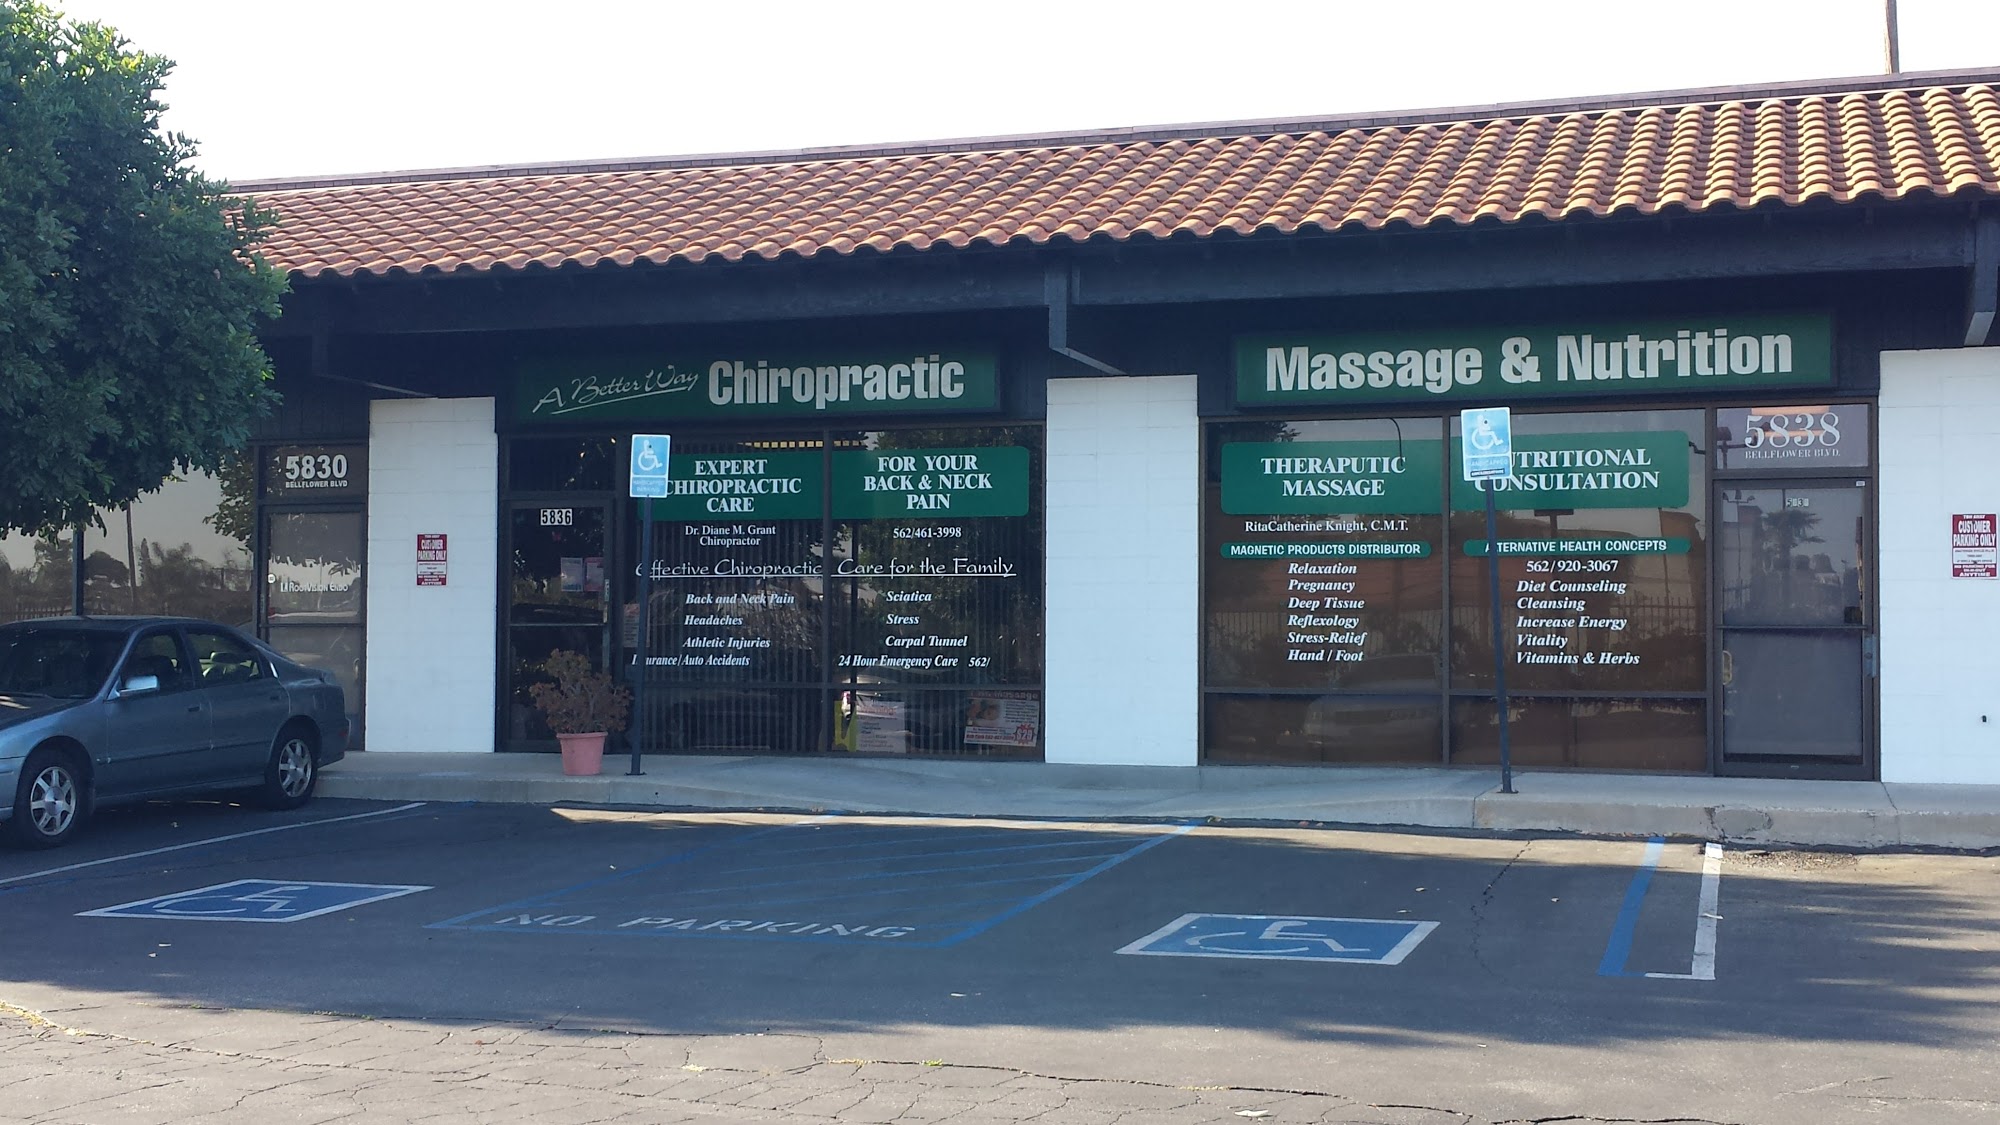 Chiropractic, Massage, and Nutrition